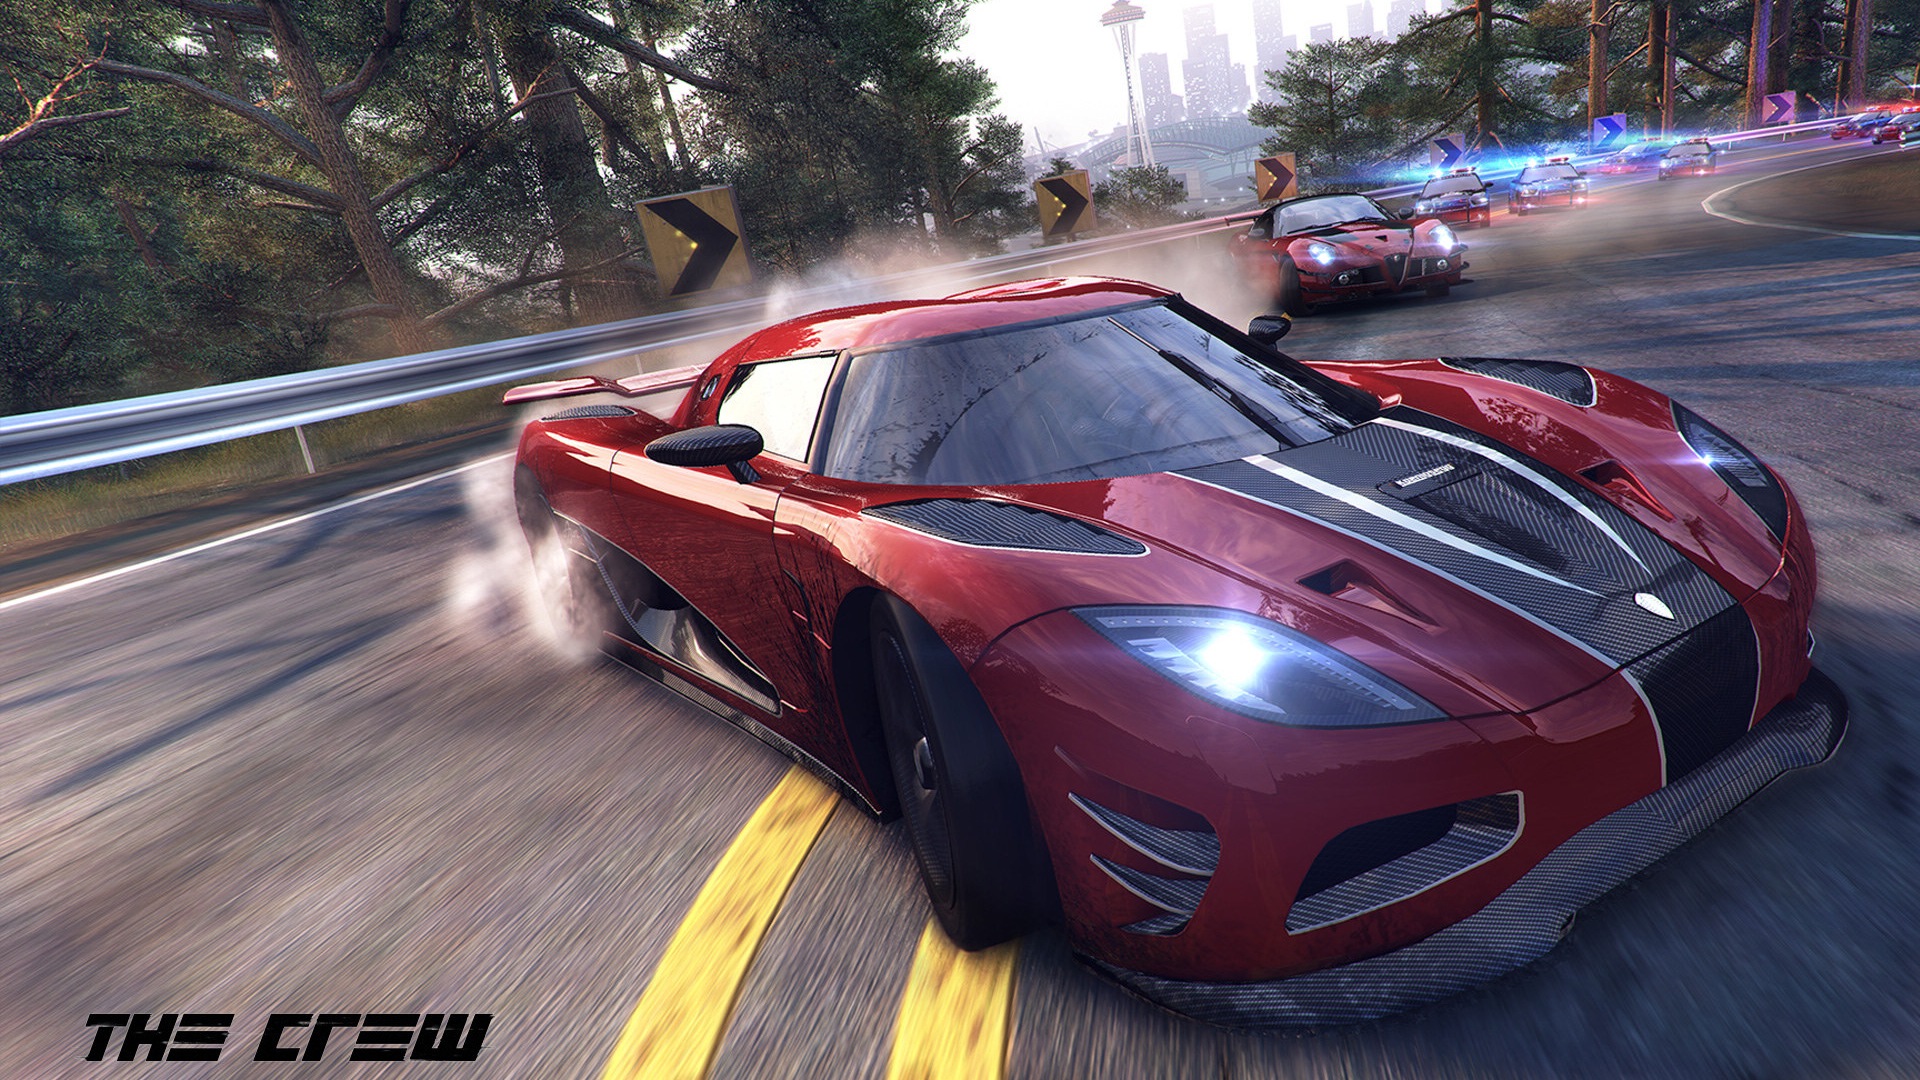 The Crew game HD wallpapers #8 - 1920x1080